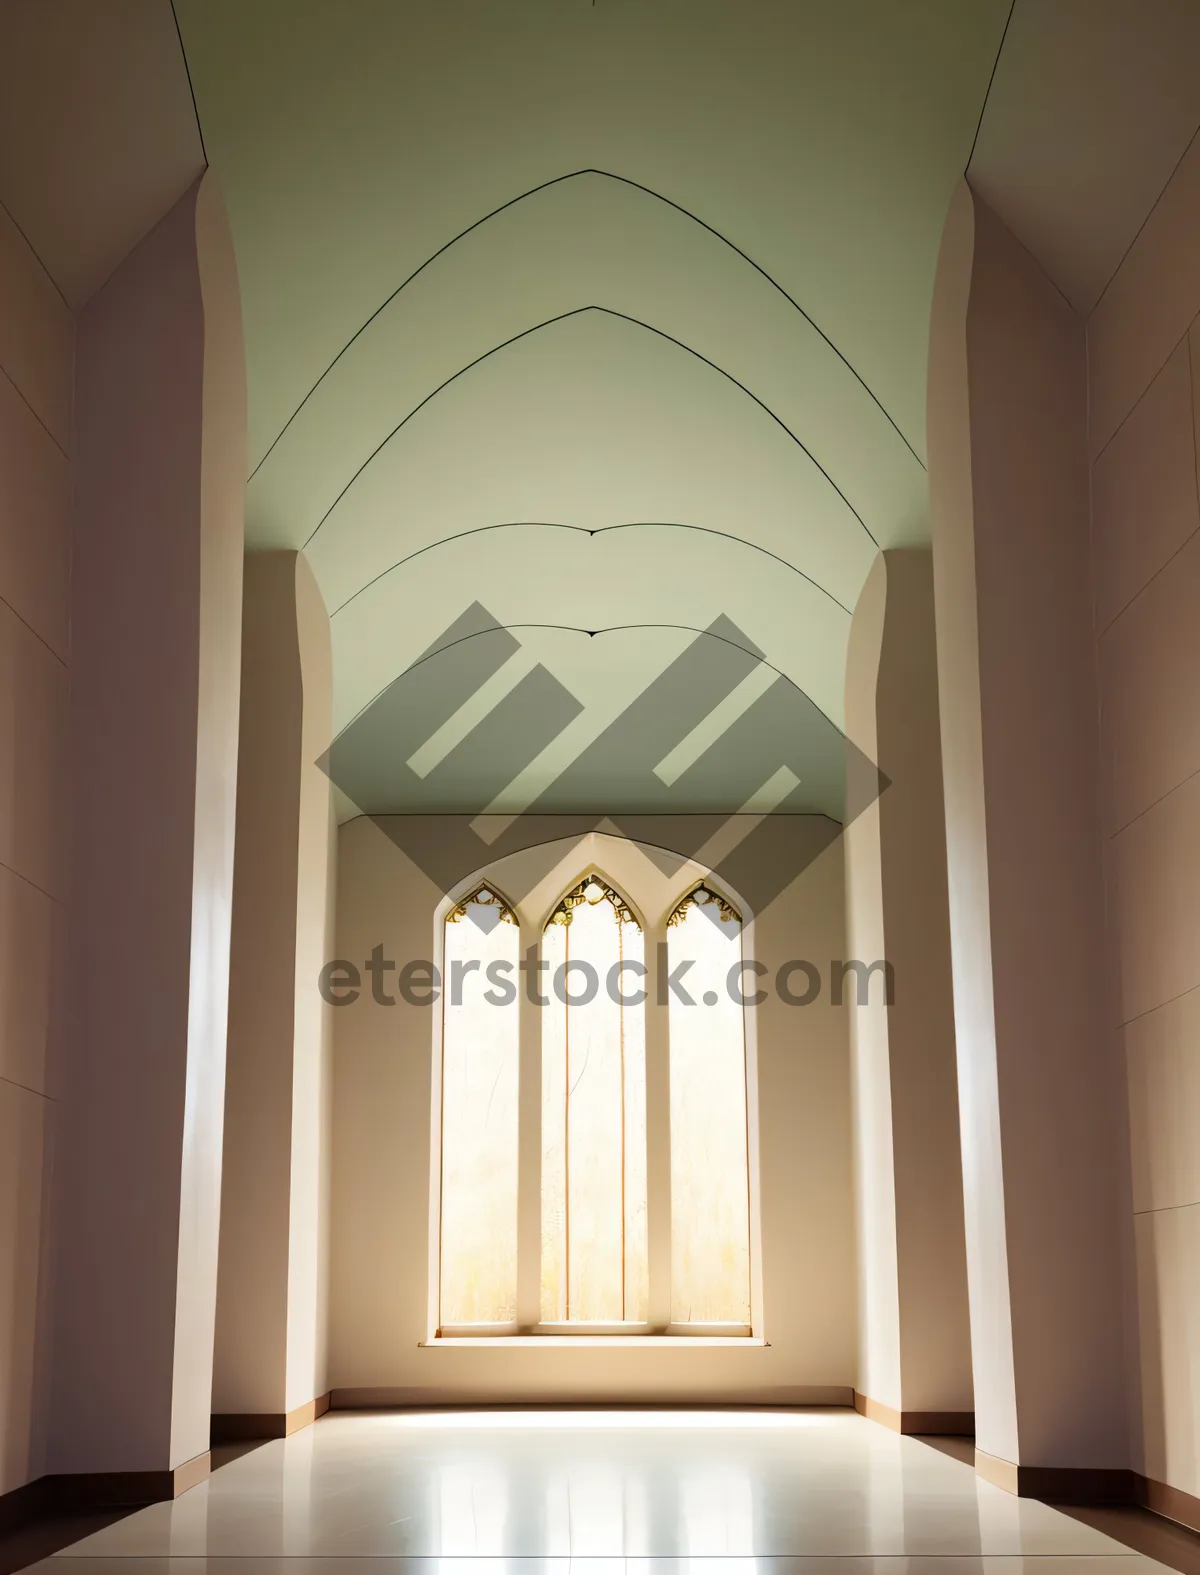 Picture of Anteroom Door with Ancient Religious Architecture